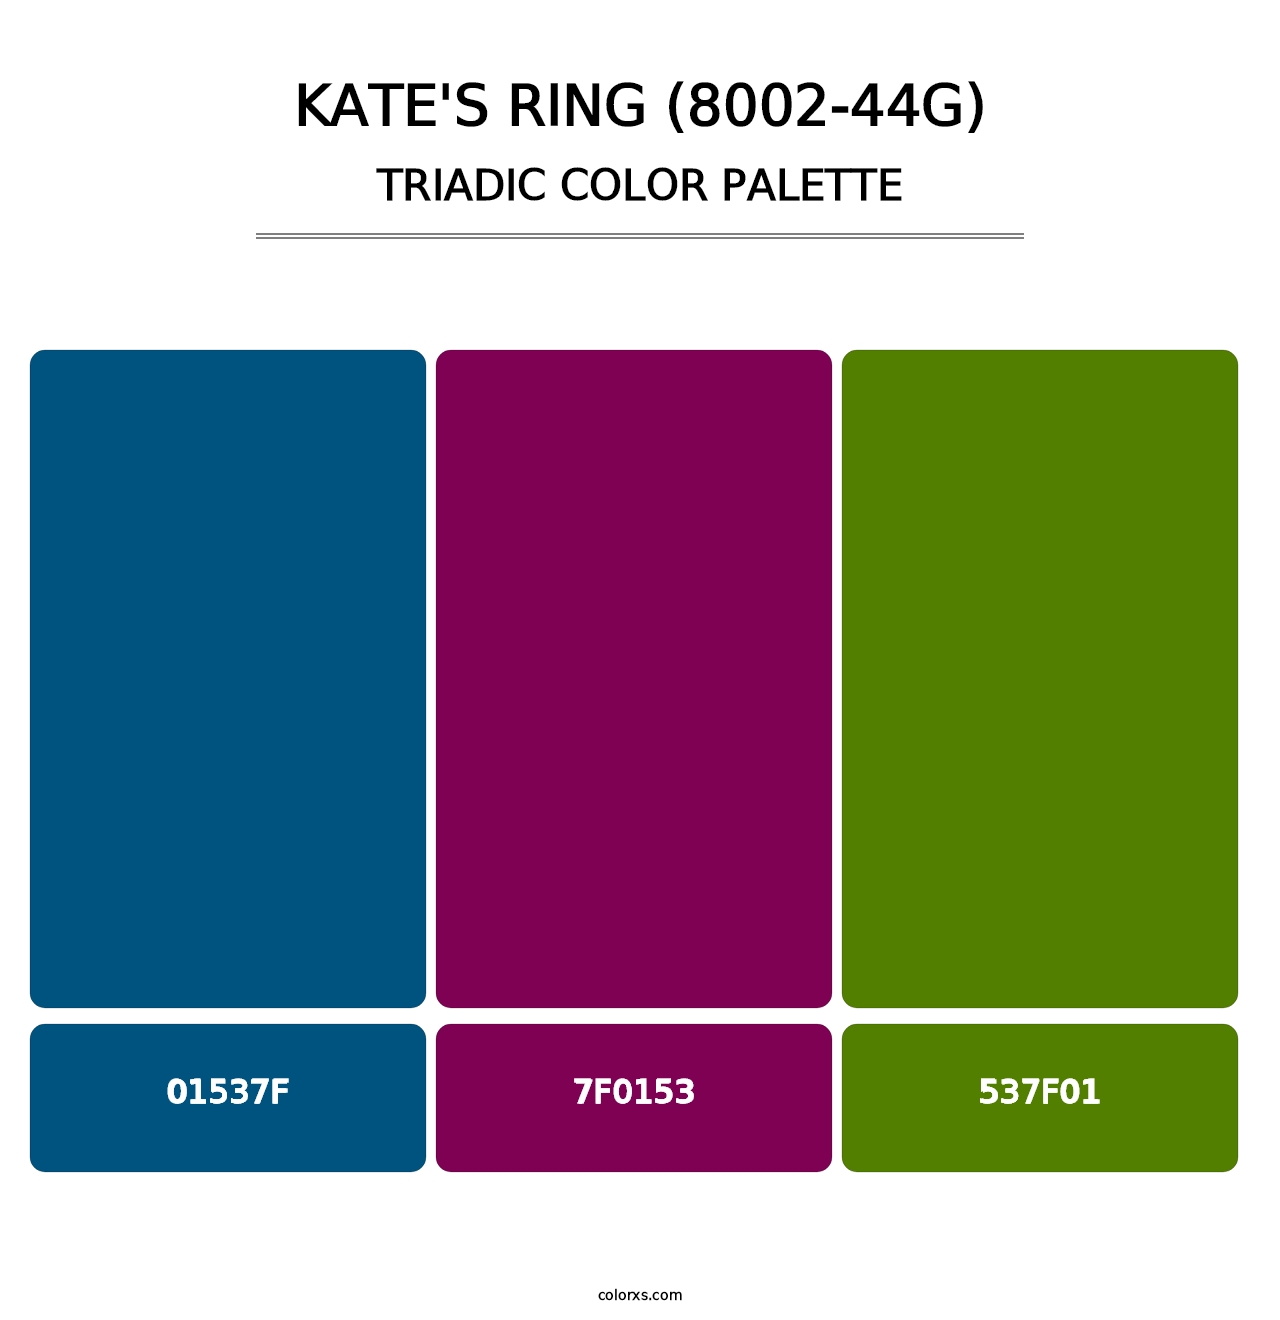 Kate's Ring (8002-44G) - Triadic Color Palette